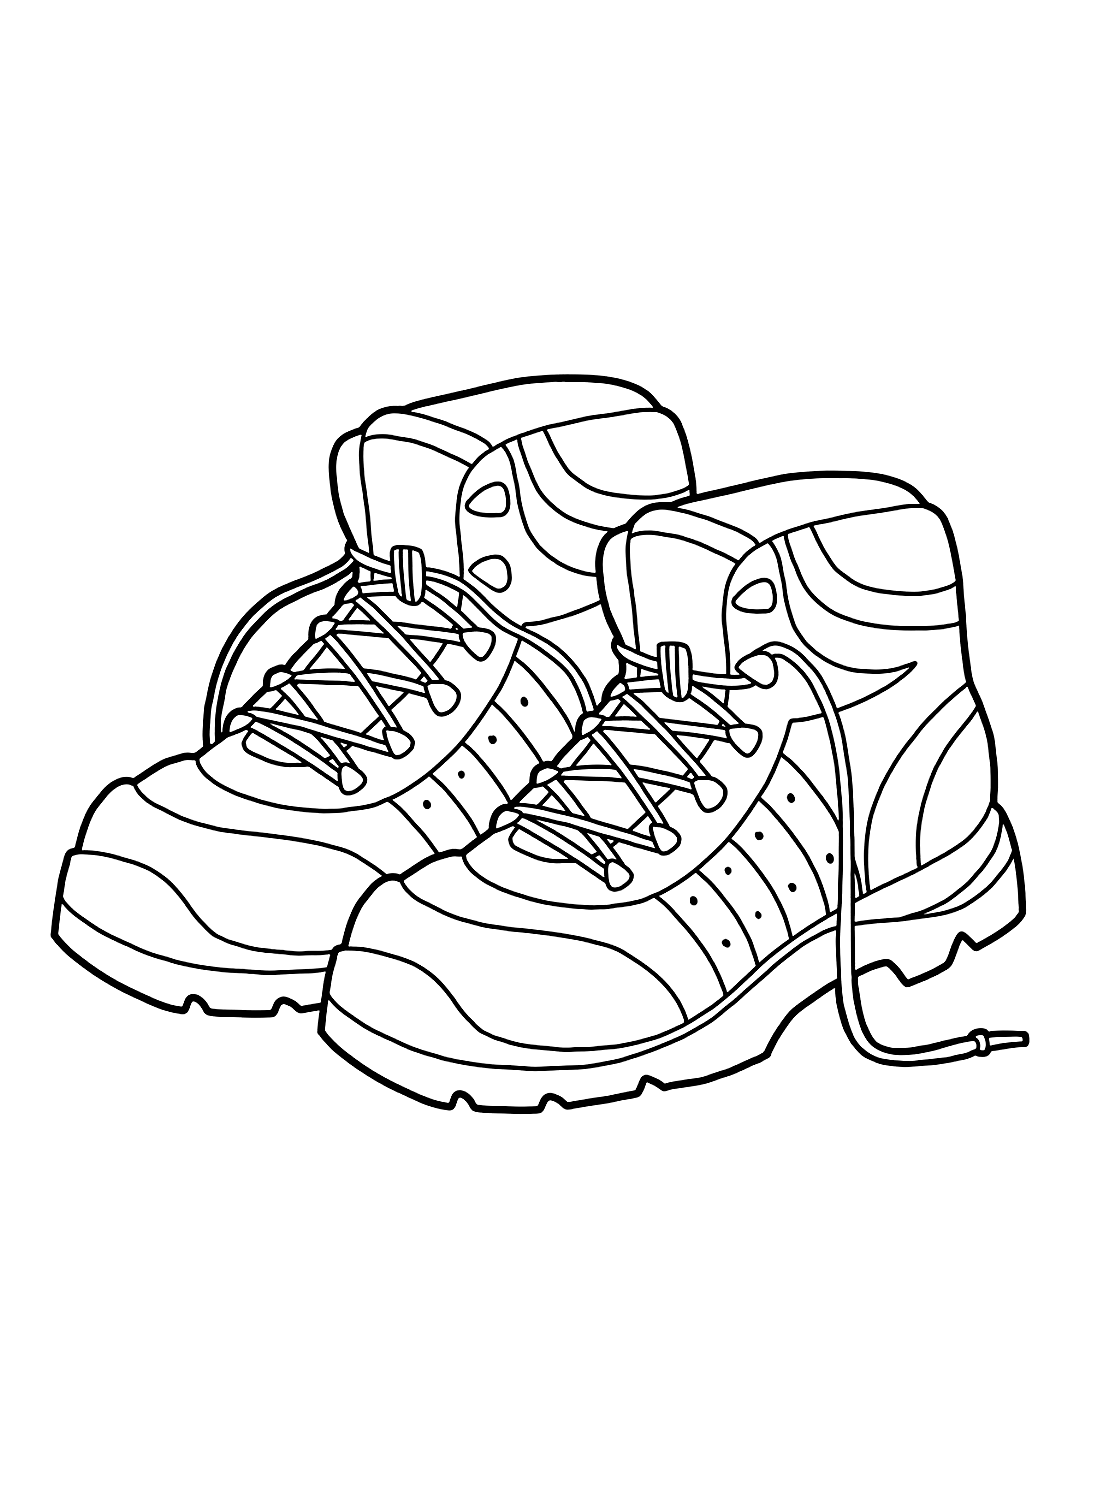 Easy shoes picture to color